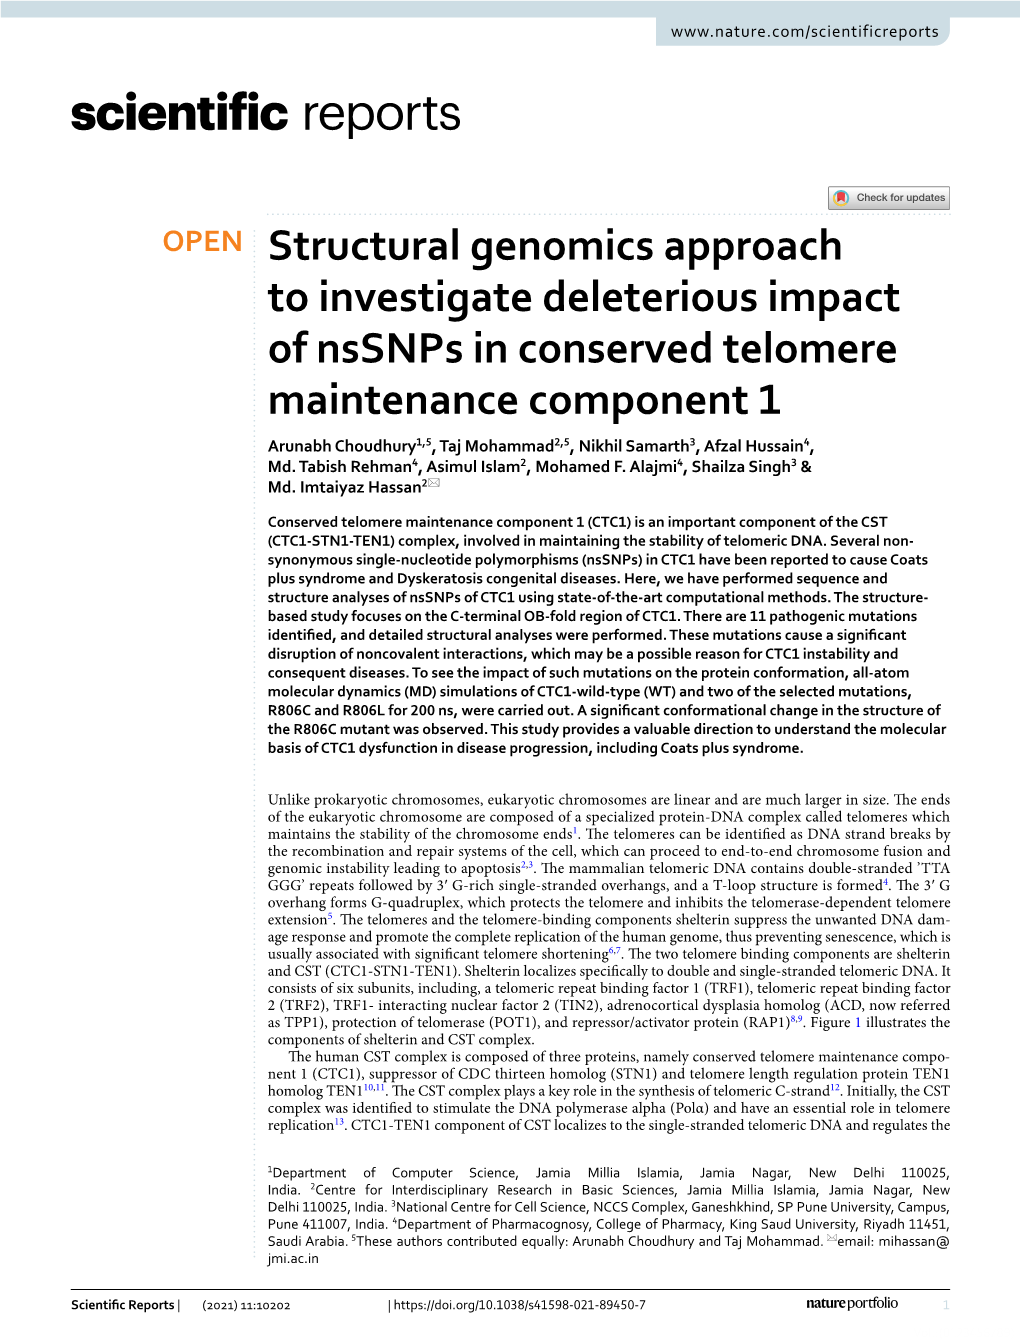 Structural Genomics Approach to Investigate Deleterious Impact Of